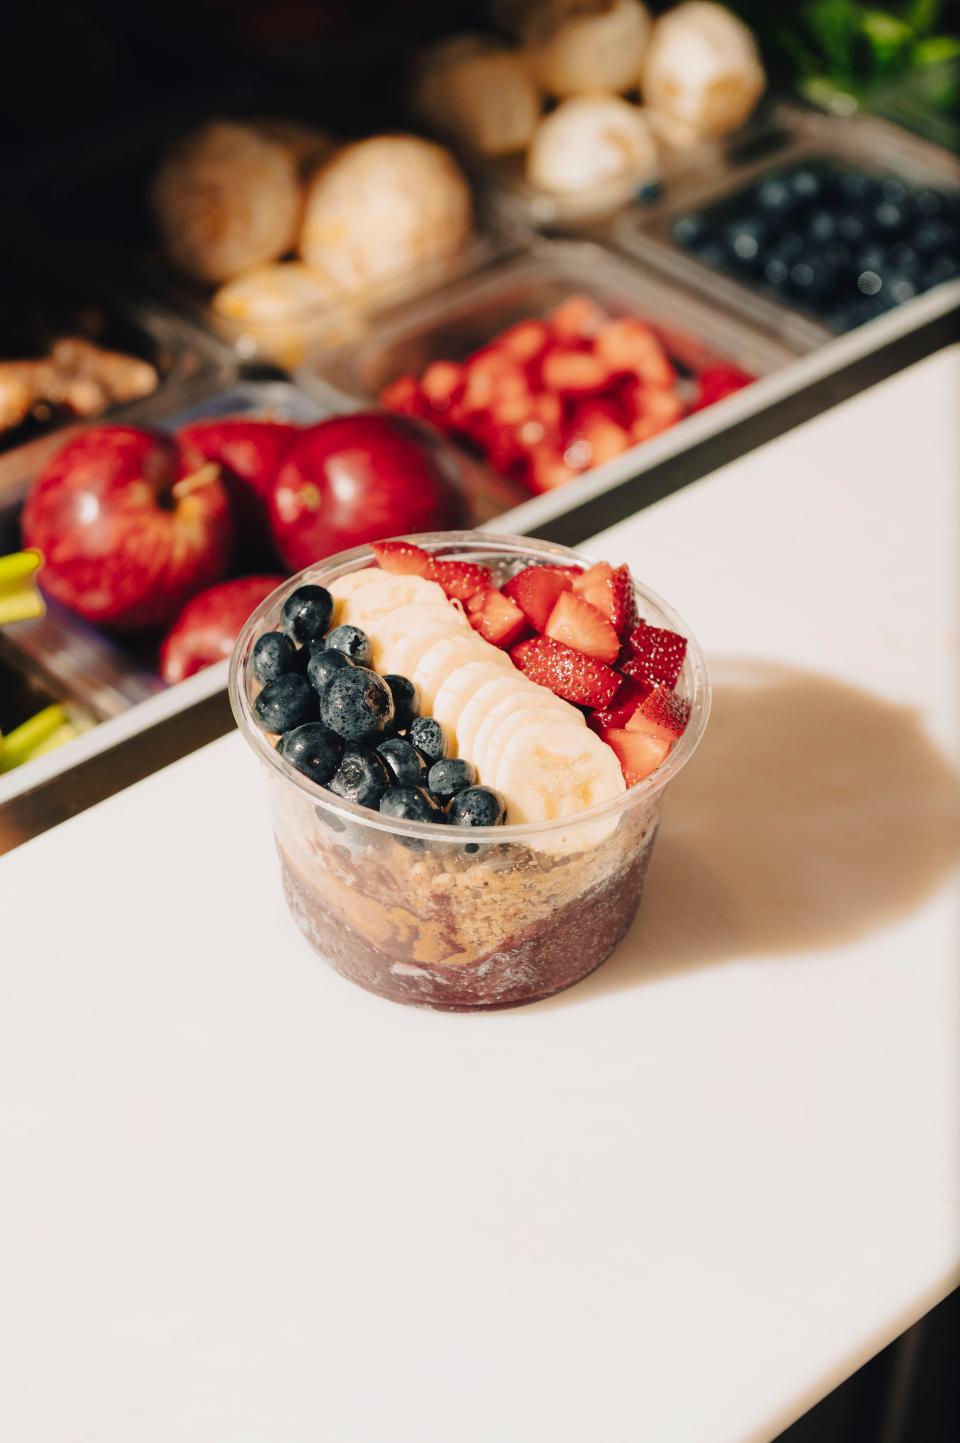 Featuring healthy and delicious acai bowls, smoothies, burritos, sandwiches and more, Celis Juice Bar will open their third location off of Linton Boulevard in Delray Beach in June.